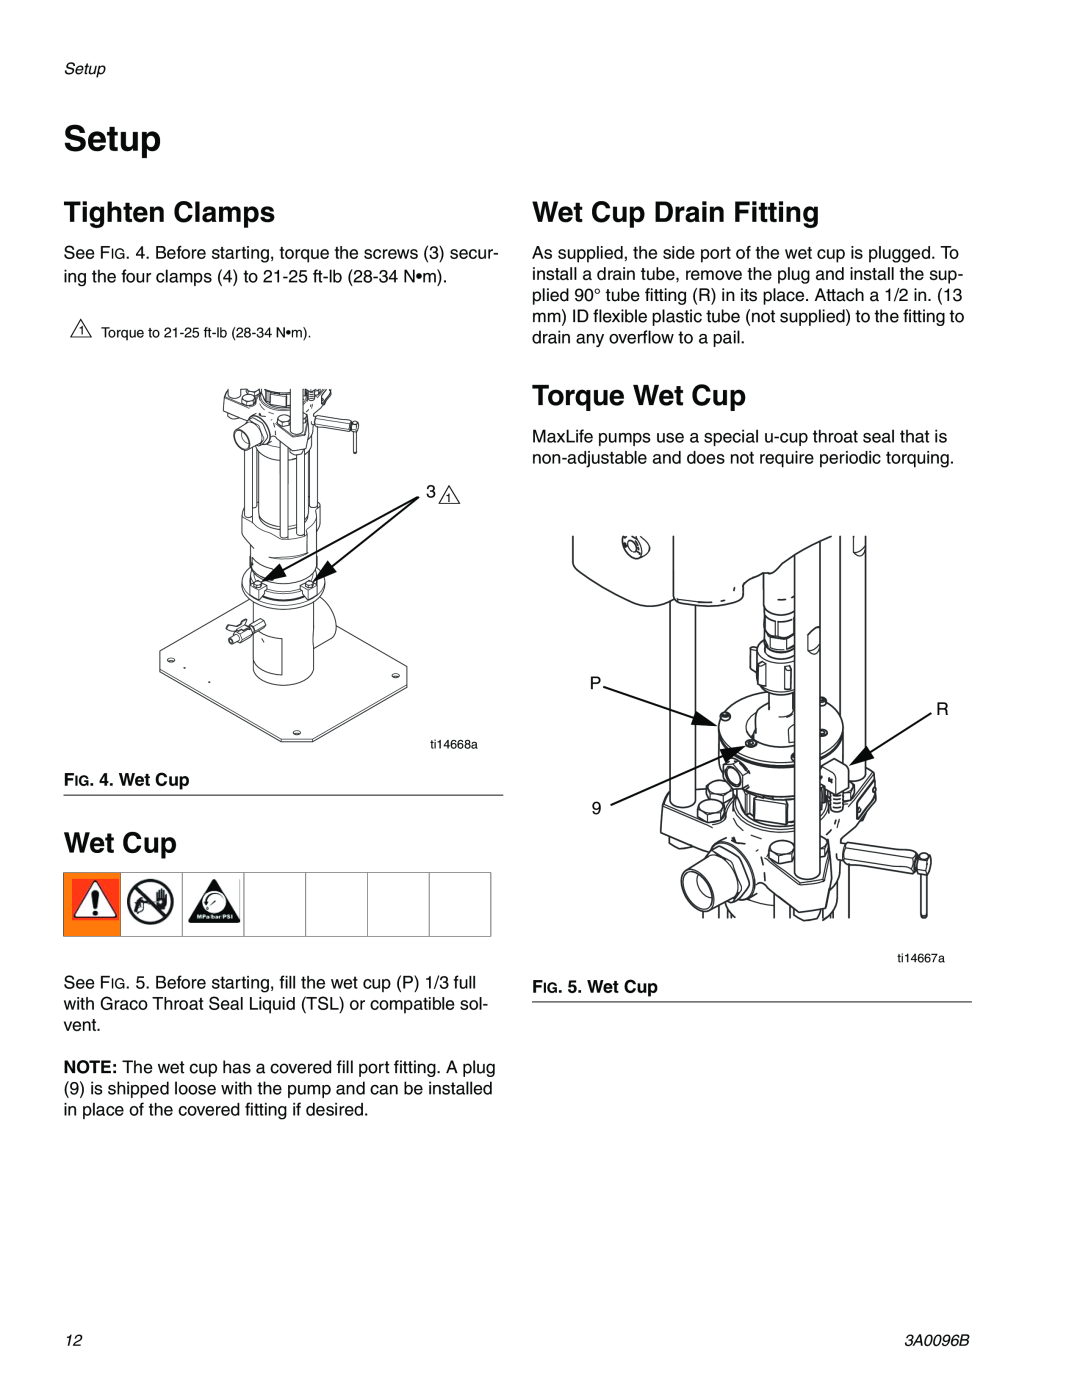 Graco 3A0096B important safety instructions Setup, Tighten Clamps, Wet Cup Drain Fitting, Torque Wet Cup 